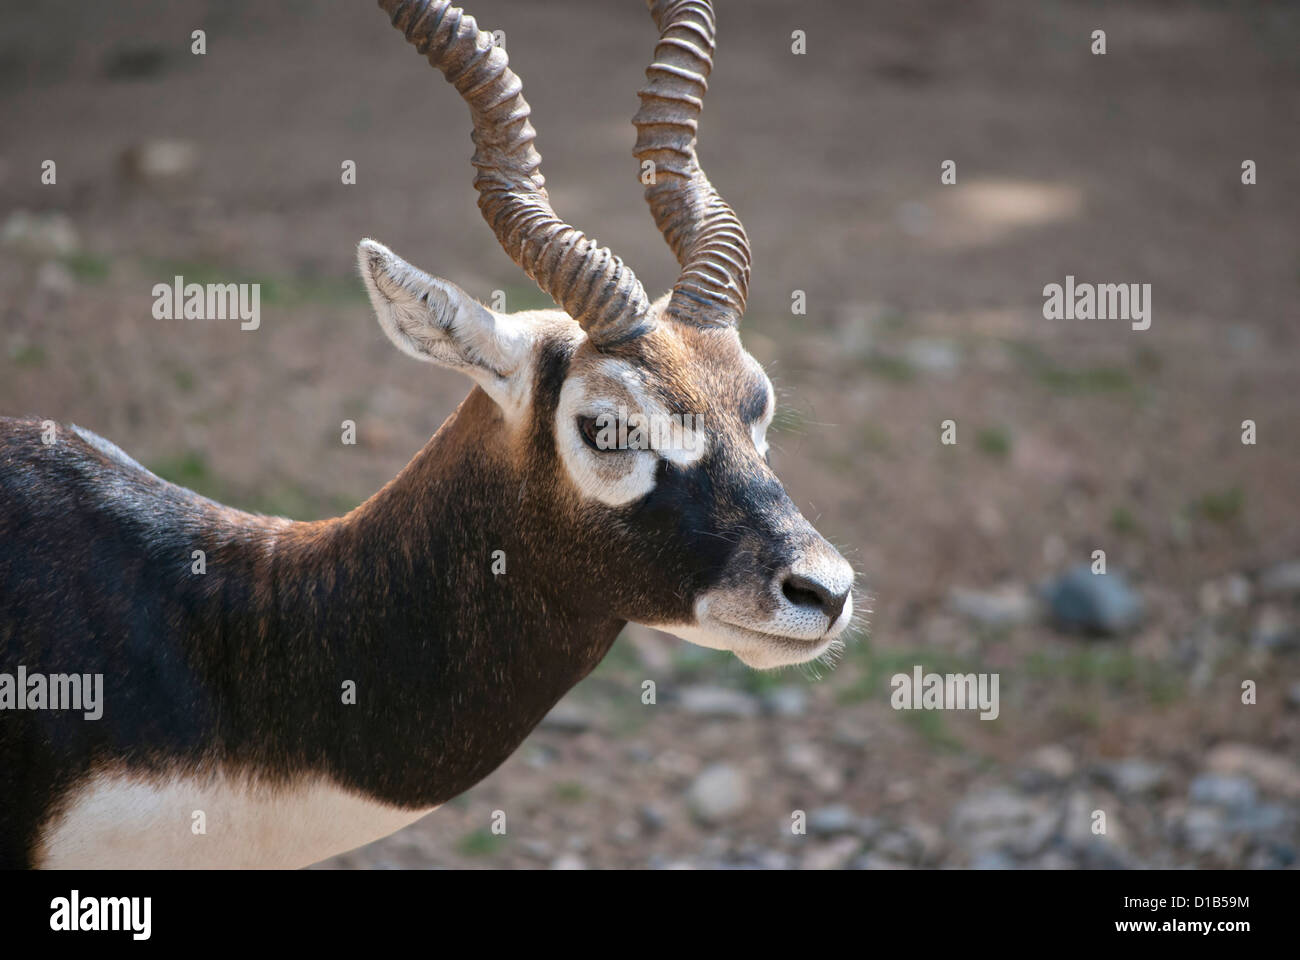 Male blackbuck, (Antilope cervicapra), antelope species native to the Indian Subcontinent. Stock Photo